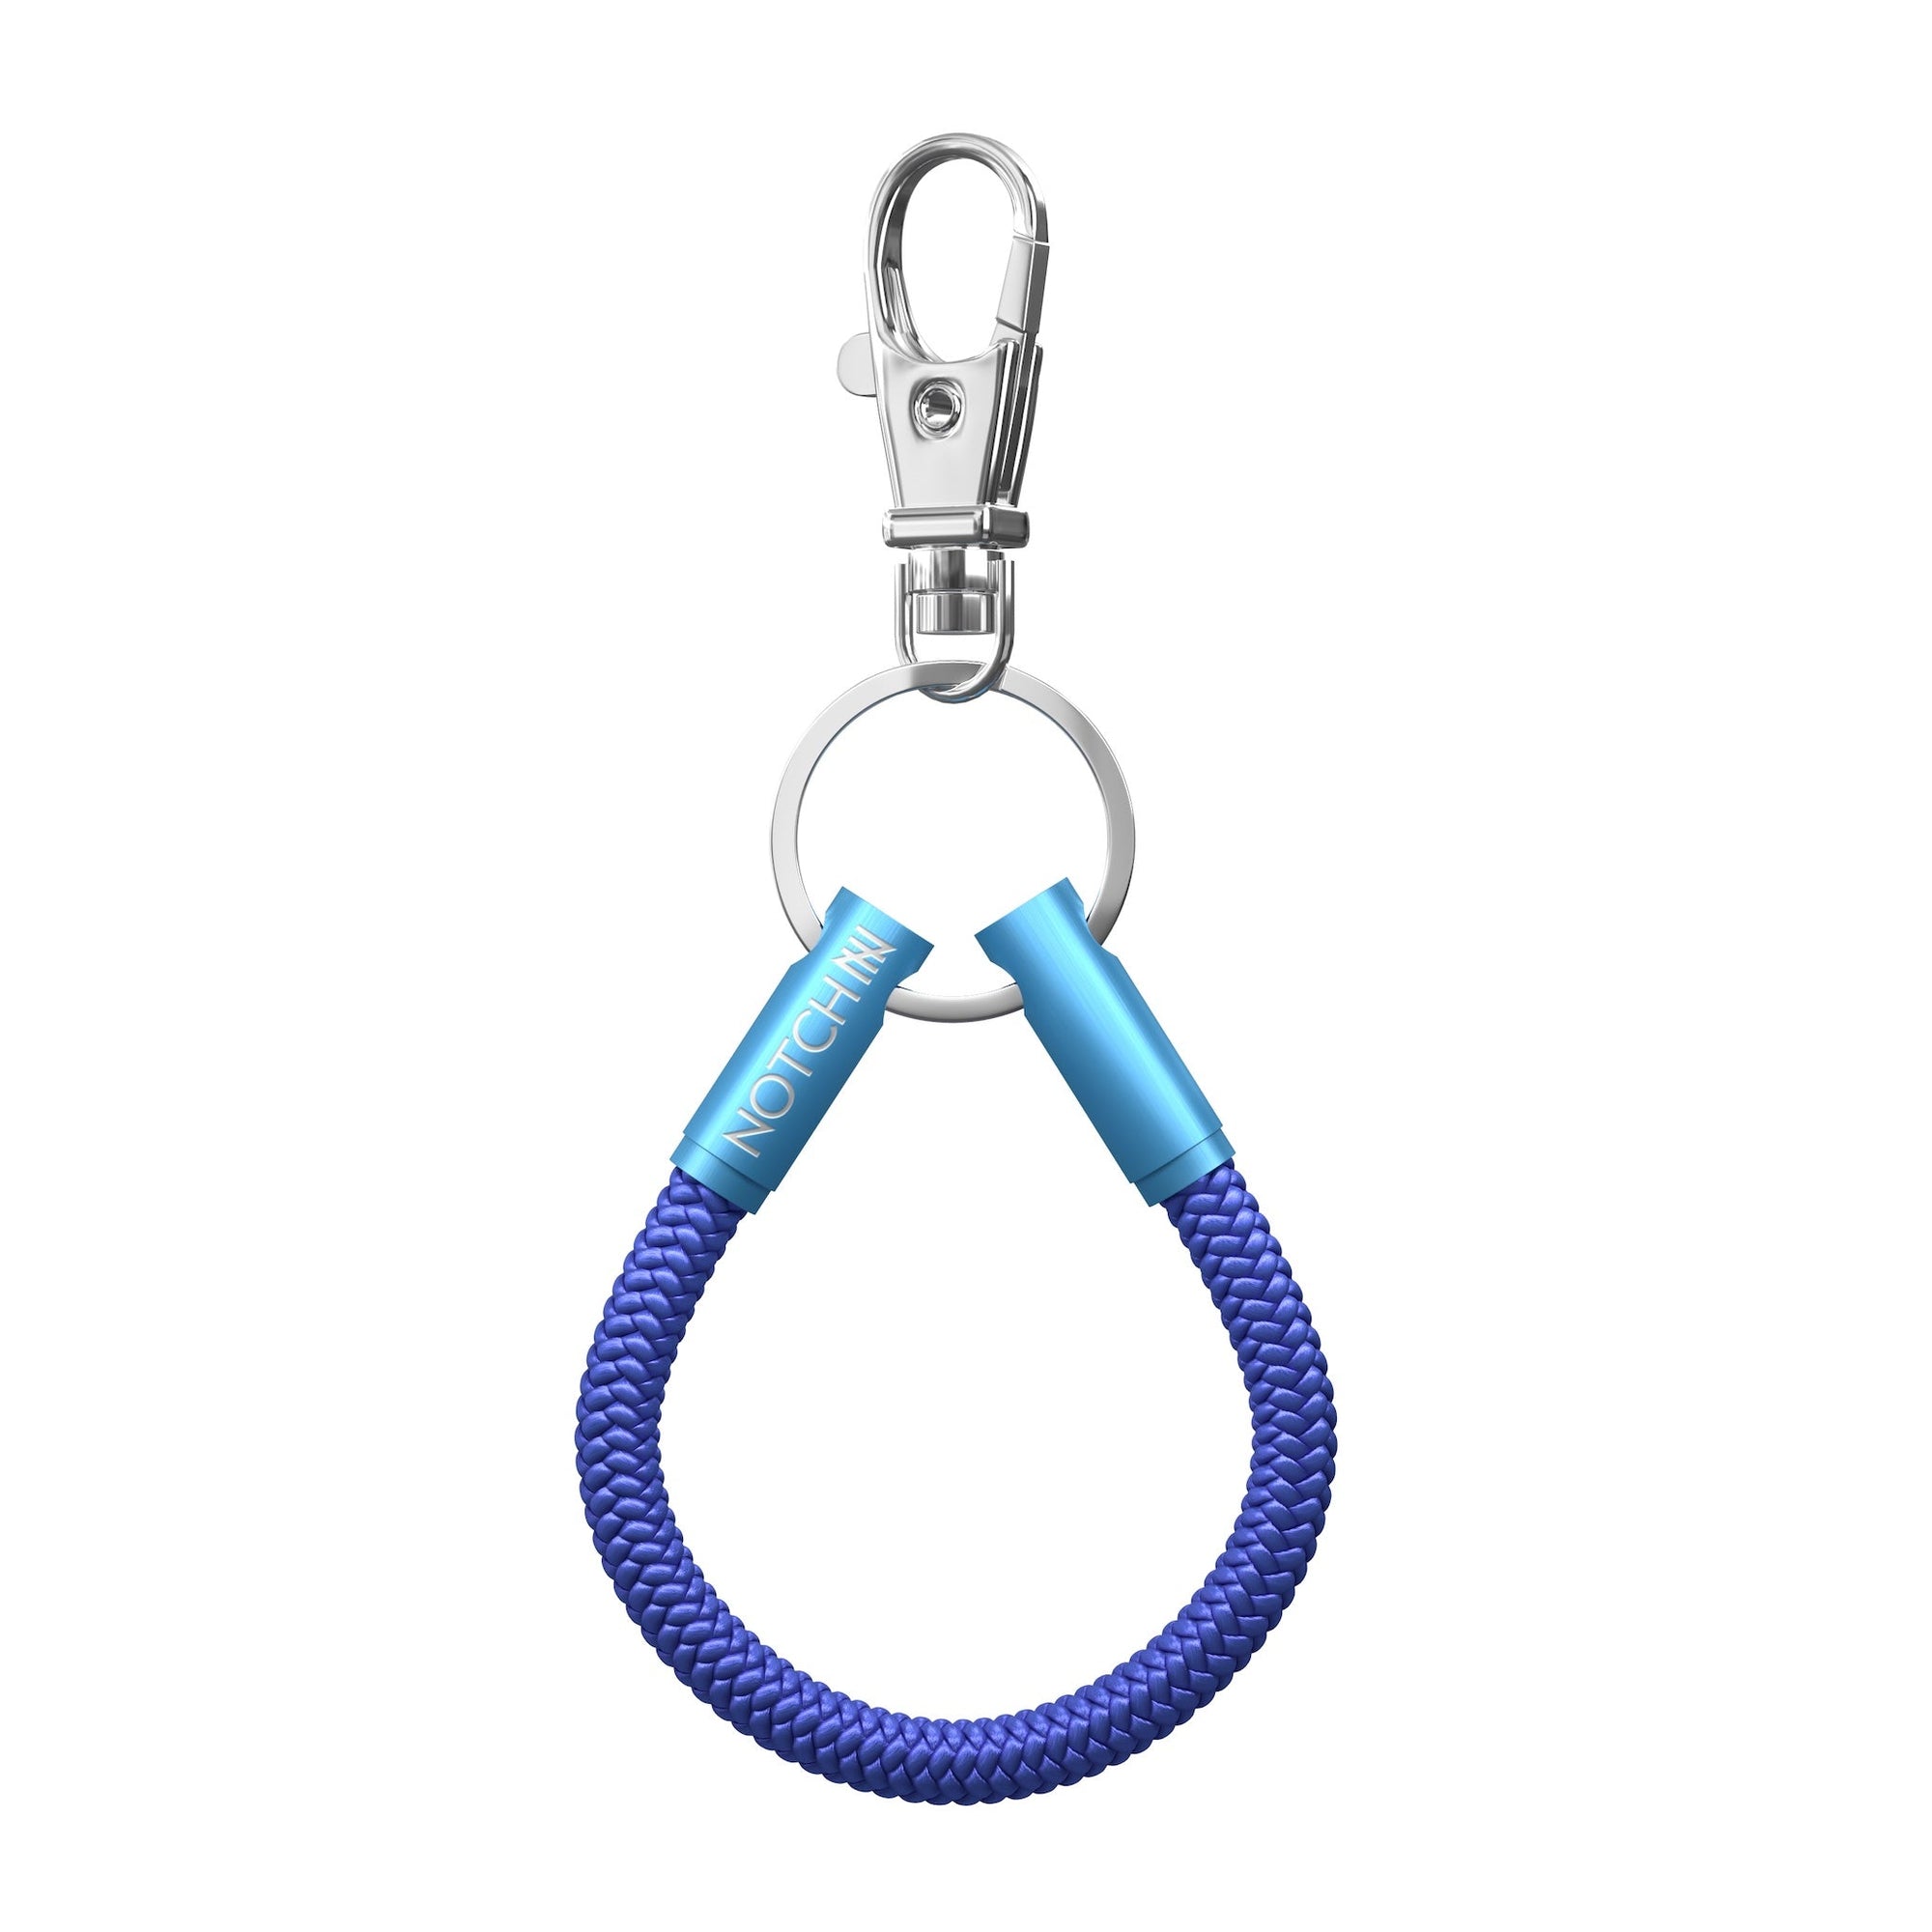 Blue Cord NOTCH Loop with blue aluminium ends by Seaways